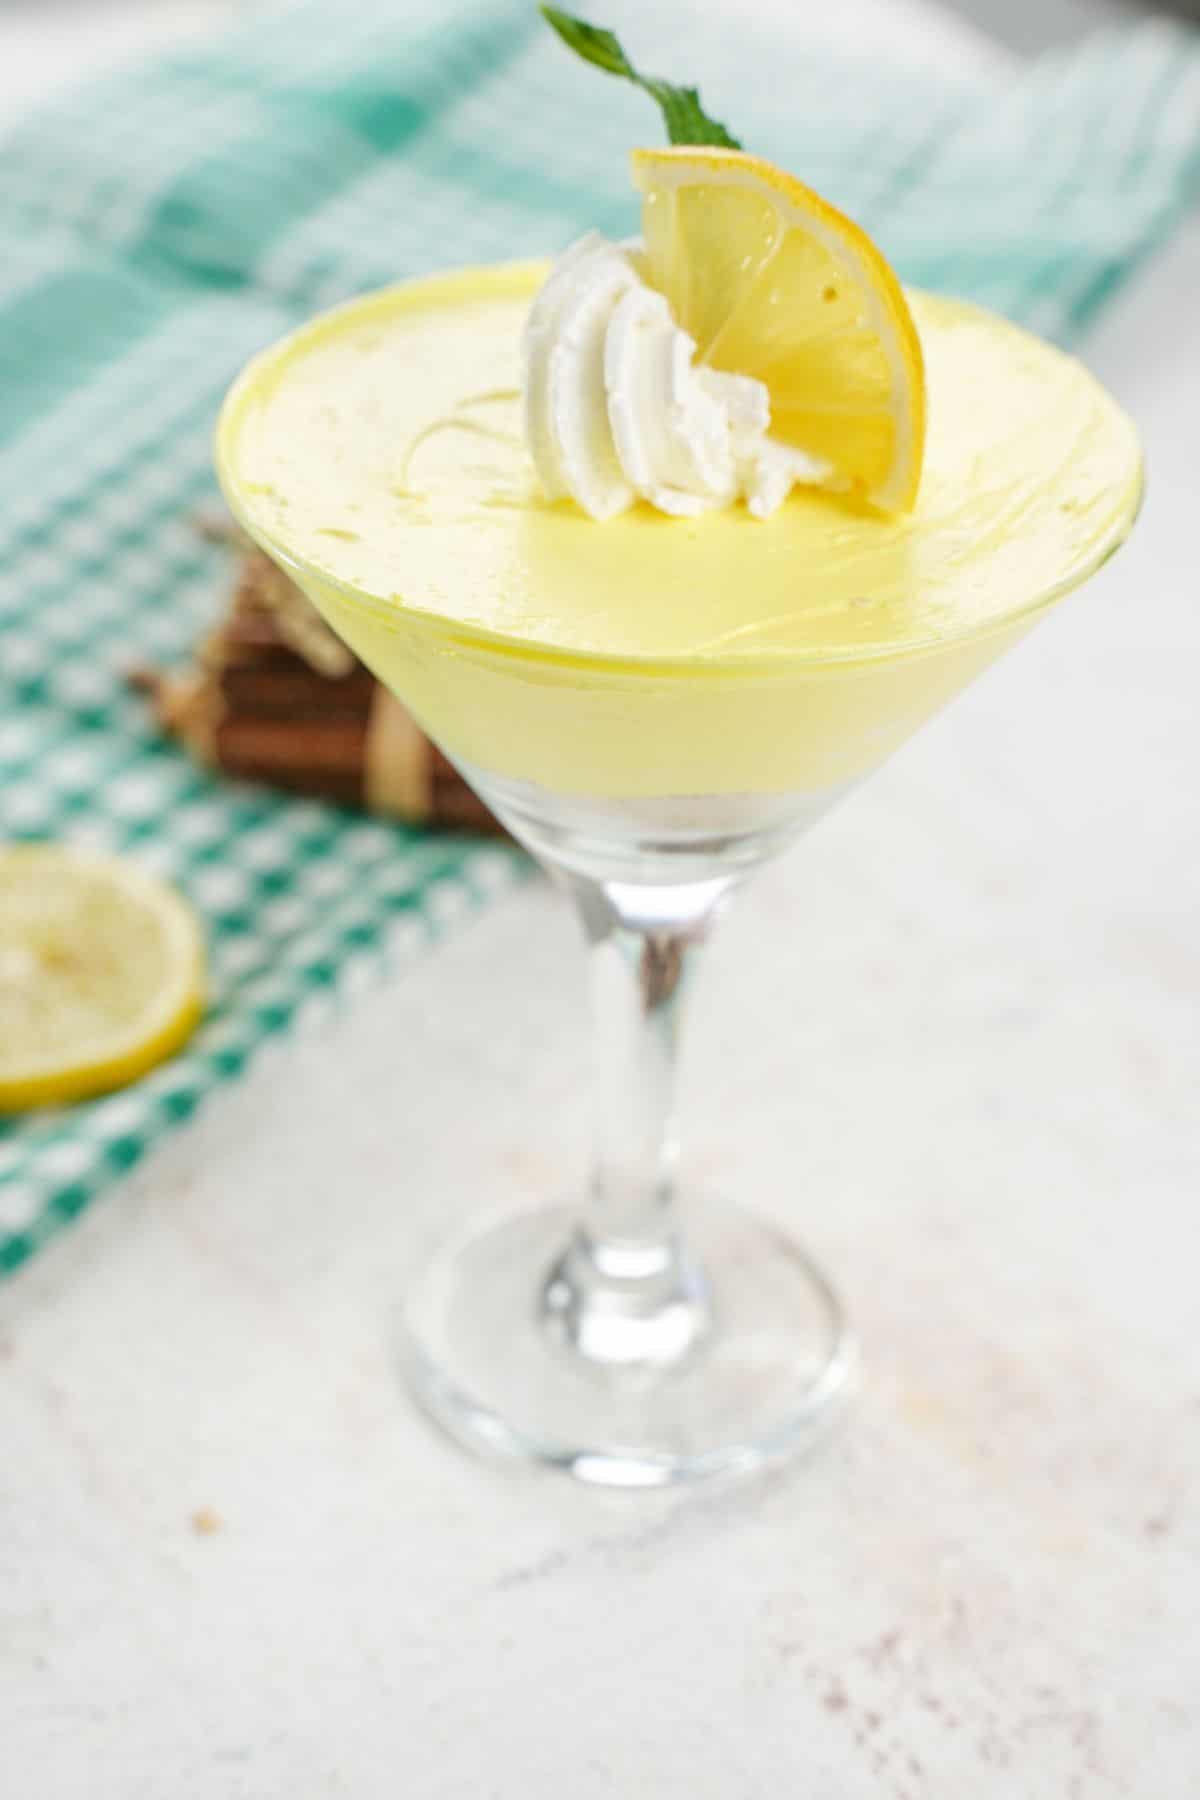 Creamy Lemon Cheesecake Mousse served with a slice of lemon on top